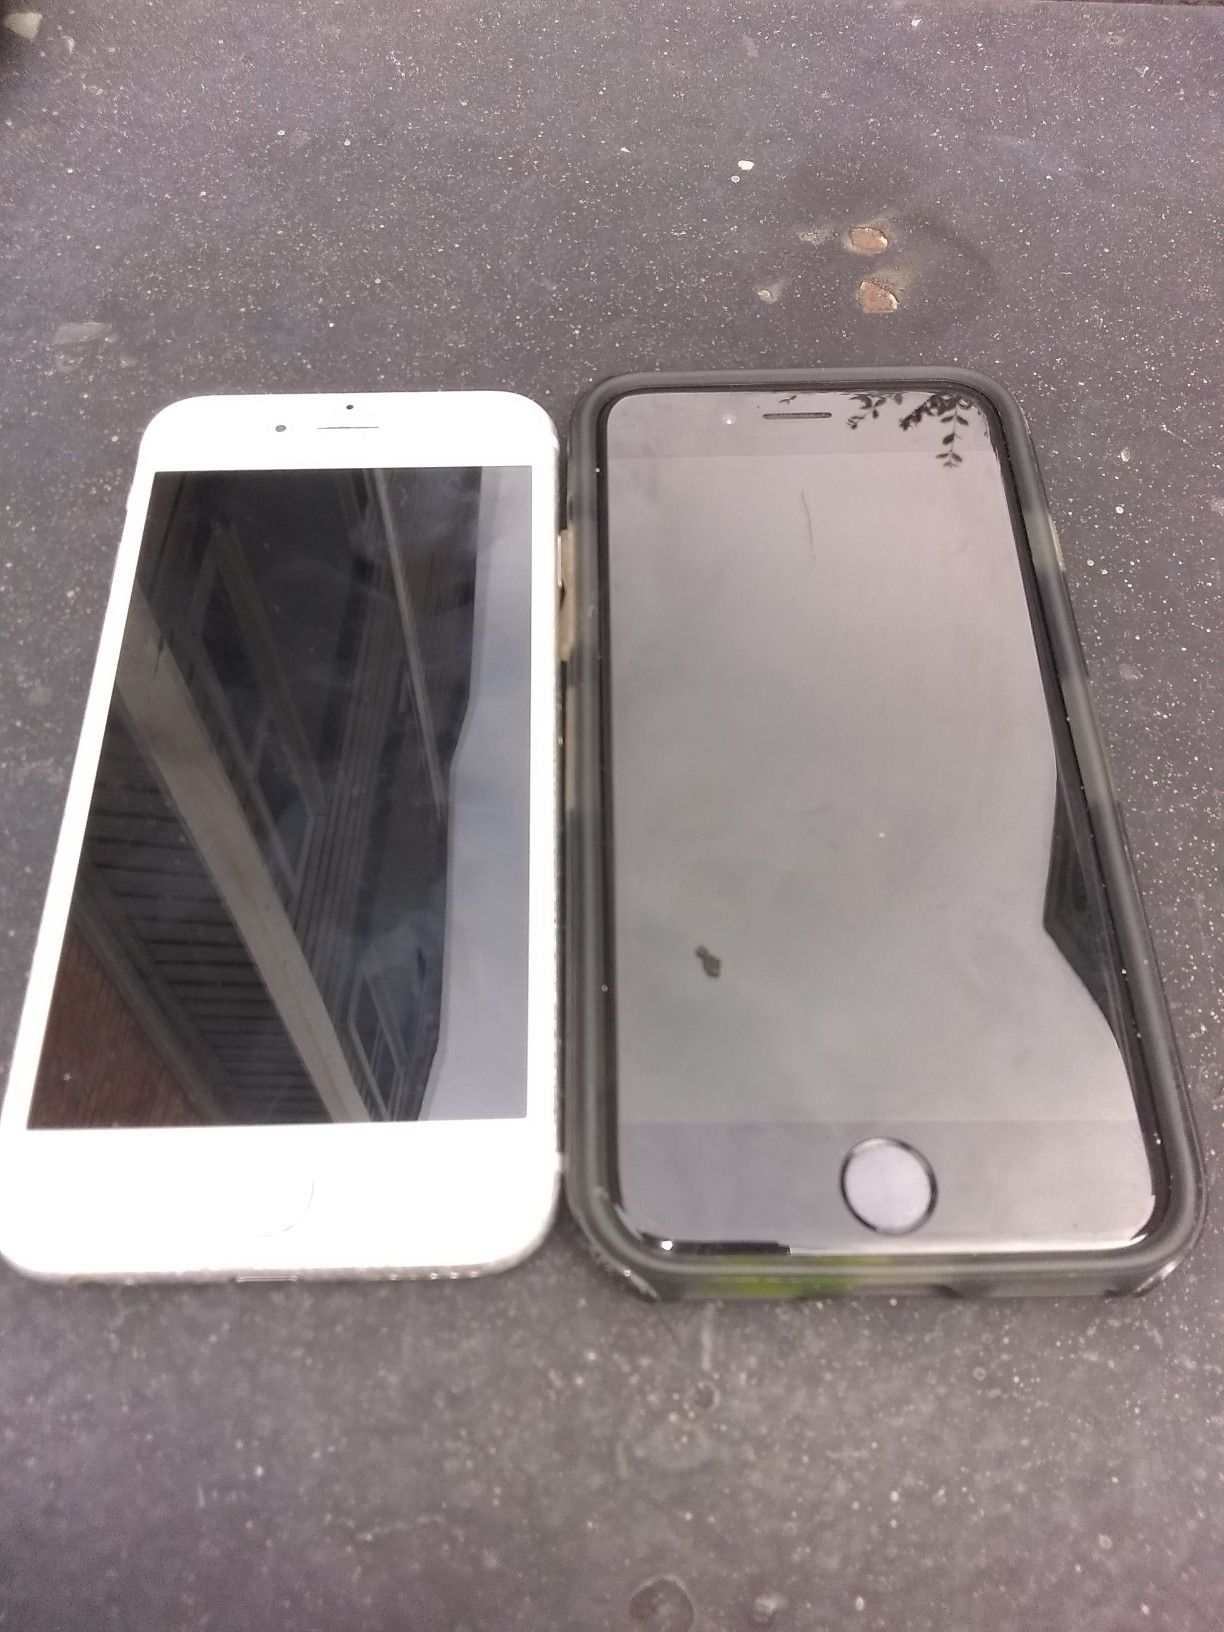 Two iPhone iPhone 6 and 6s